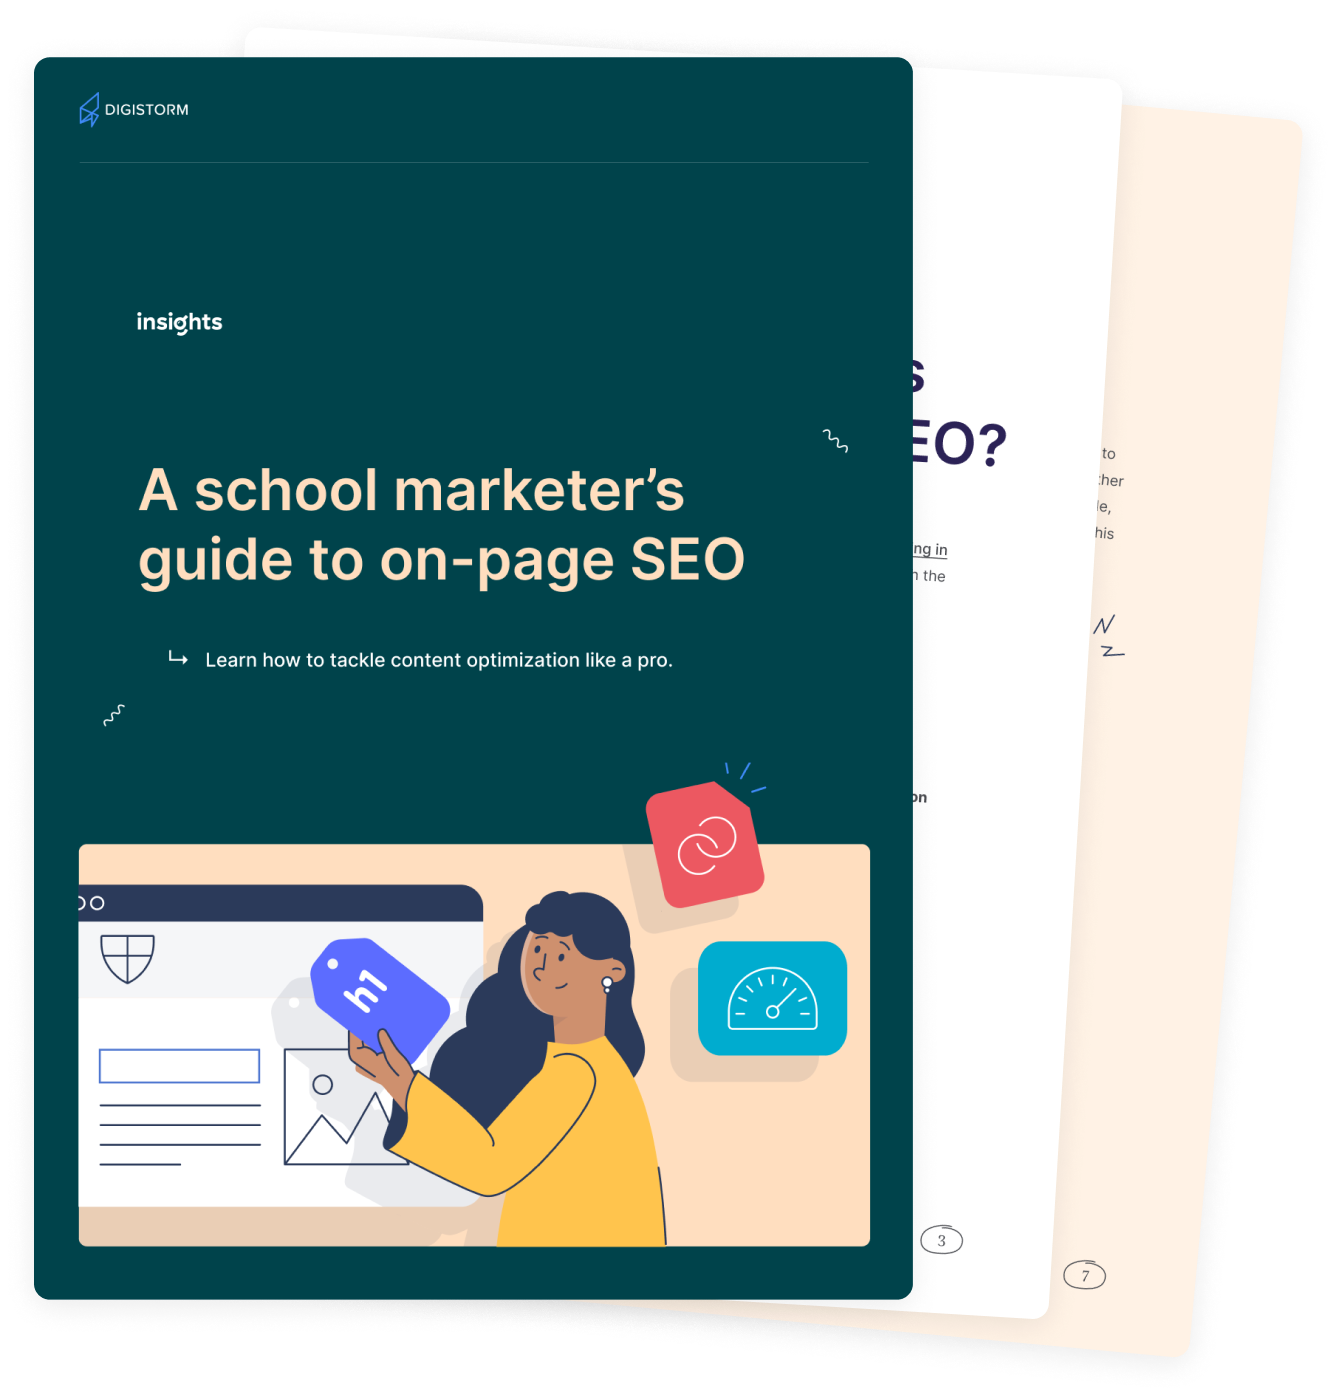 On-page SEO for school marketers